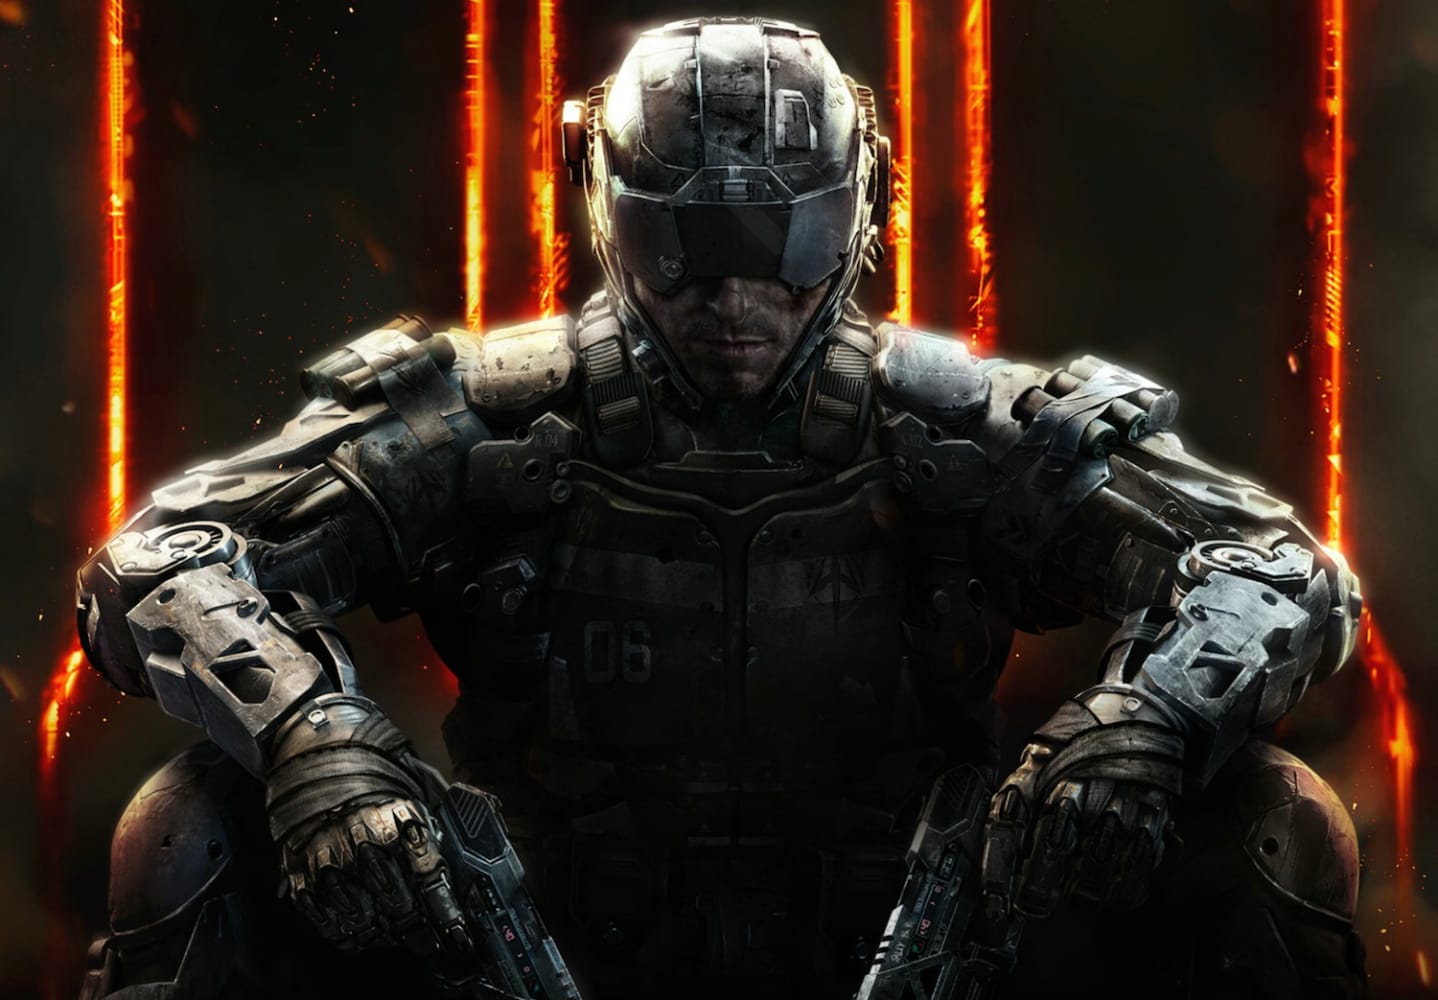 engineering pindas hoogte Why Call of Duty Pros Are So Excited About Black Ops 4